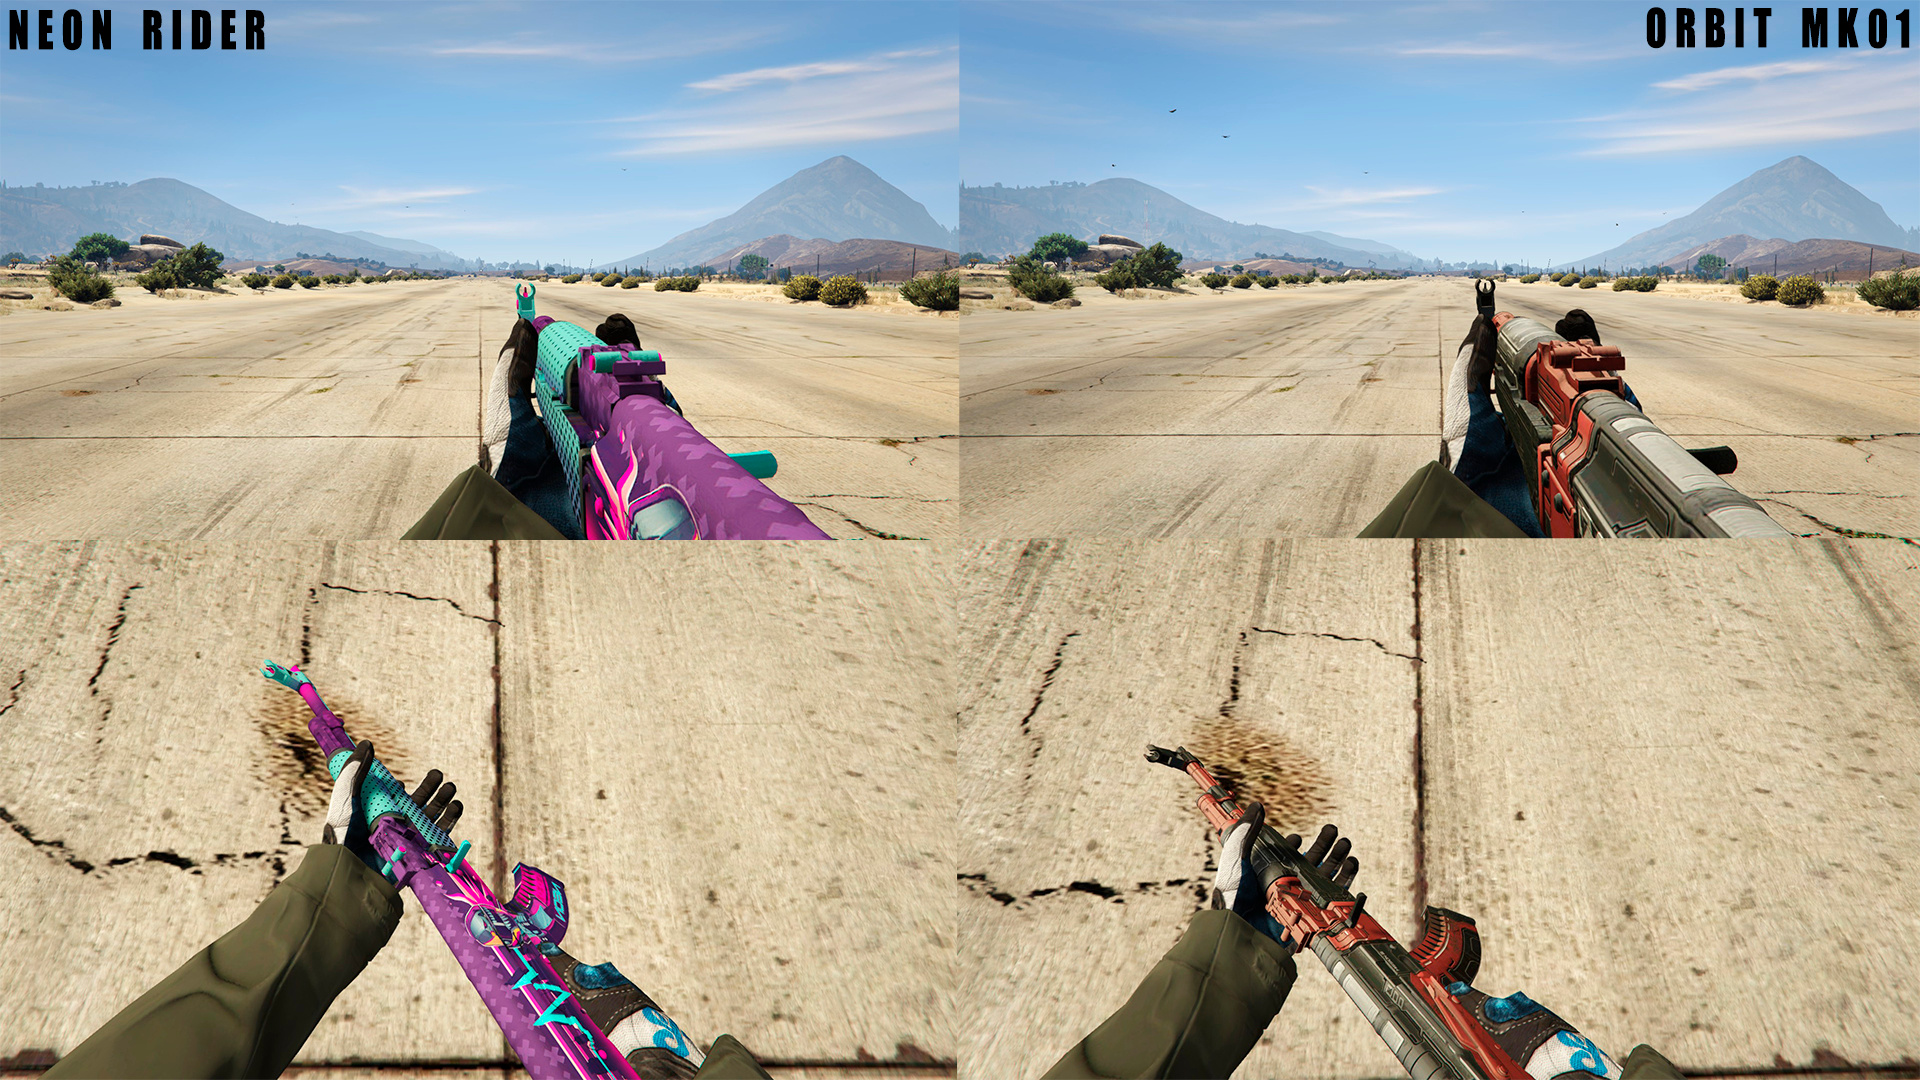 22 Skins For Ak 47 From The Game Counter Strike Global Offensive Skin Pack Gta5